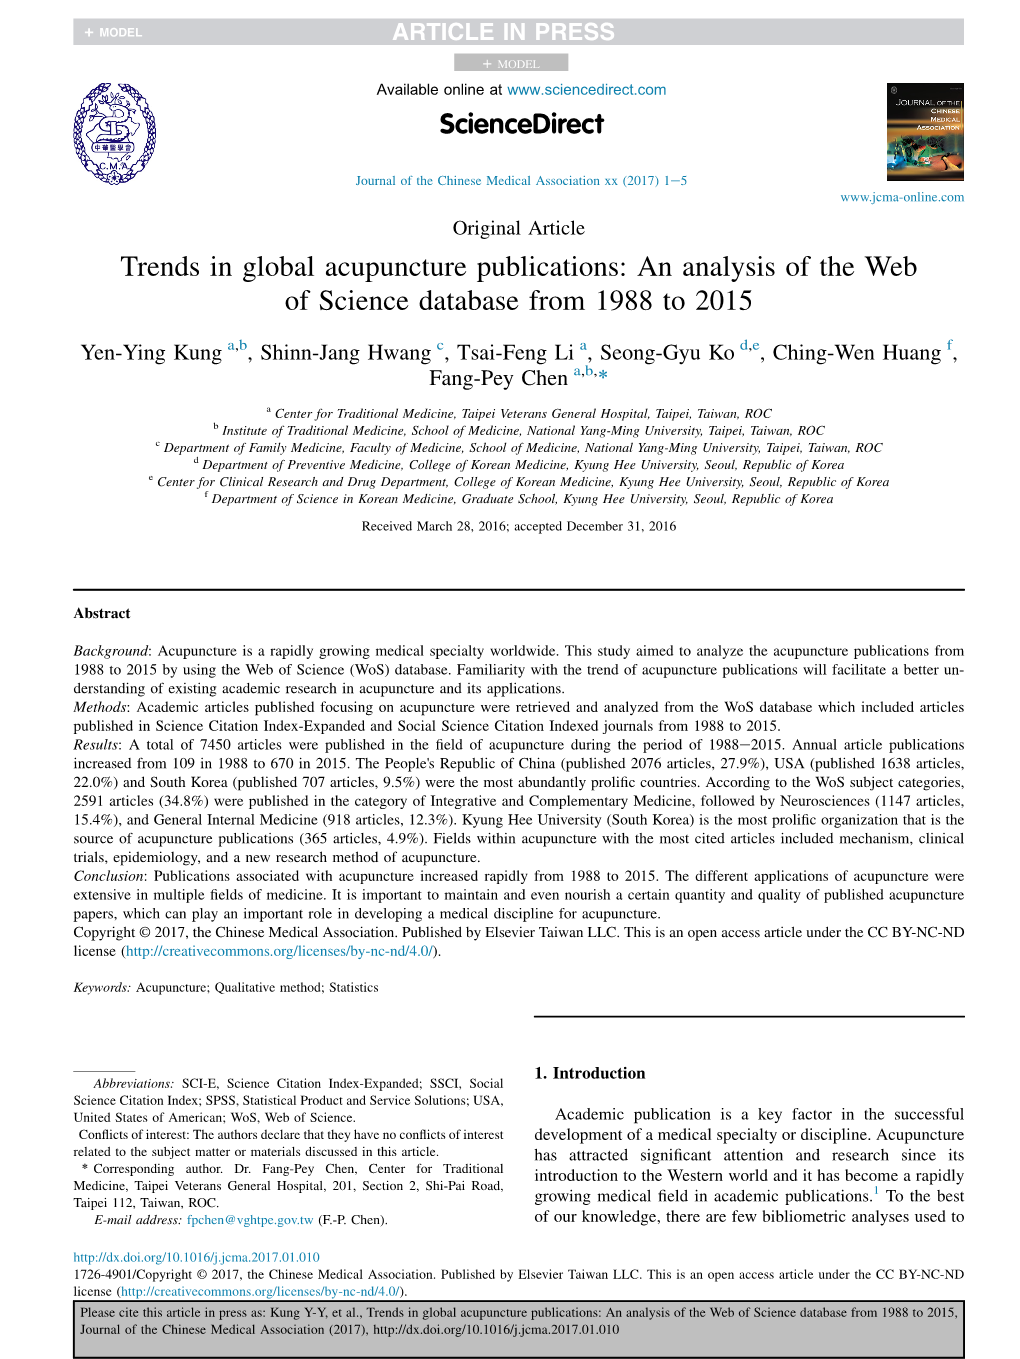 Original Articletrends in Global Acupuncture Publications: An